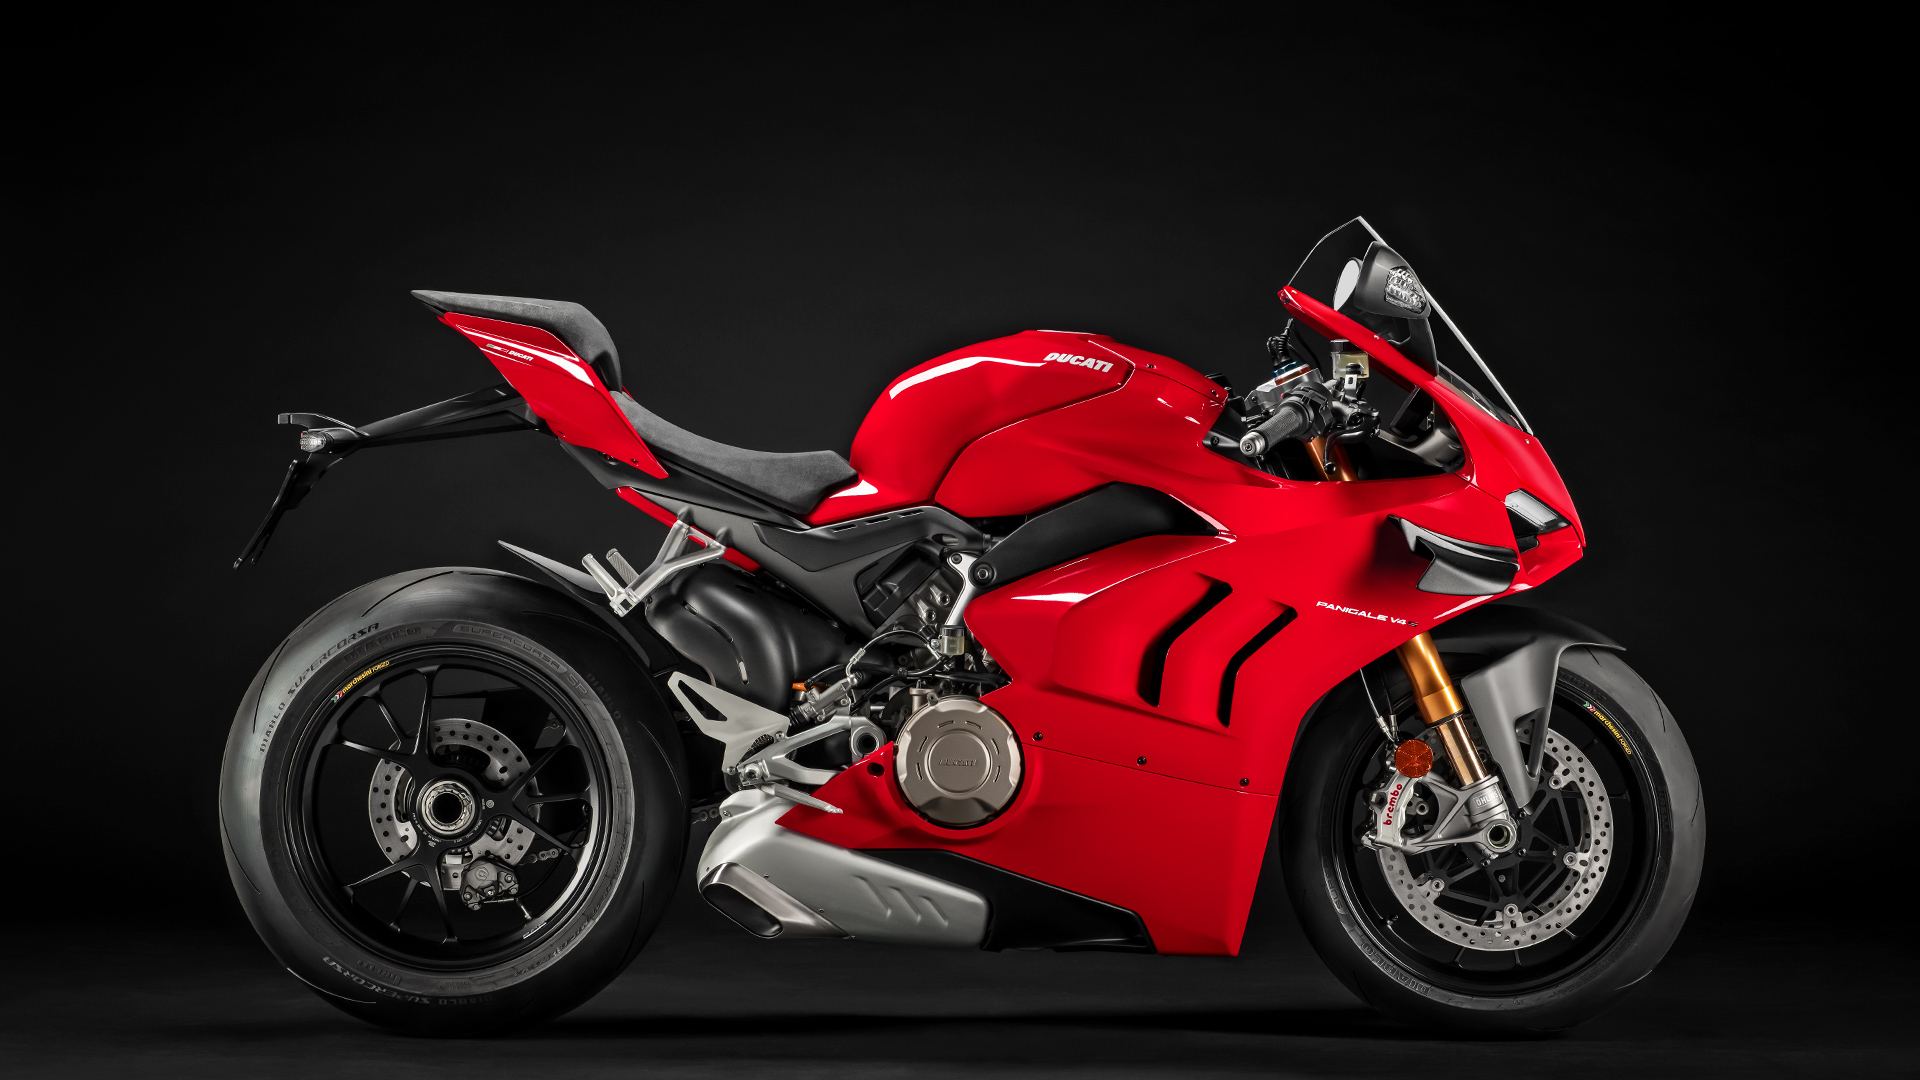 Panigale-V4-S-MY20-Red-02-Gallery-1920x1080